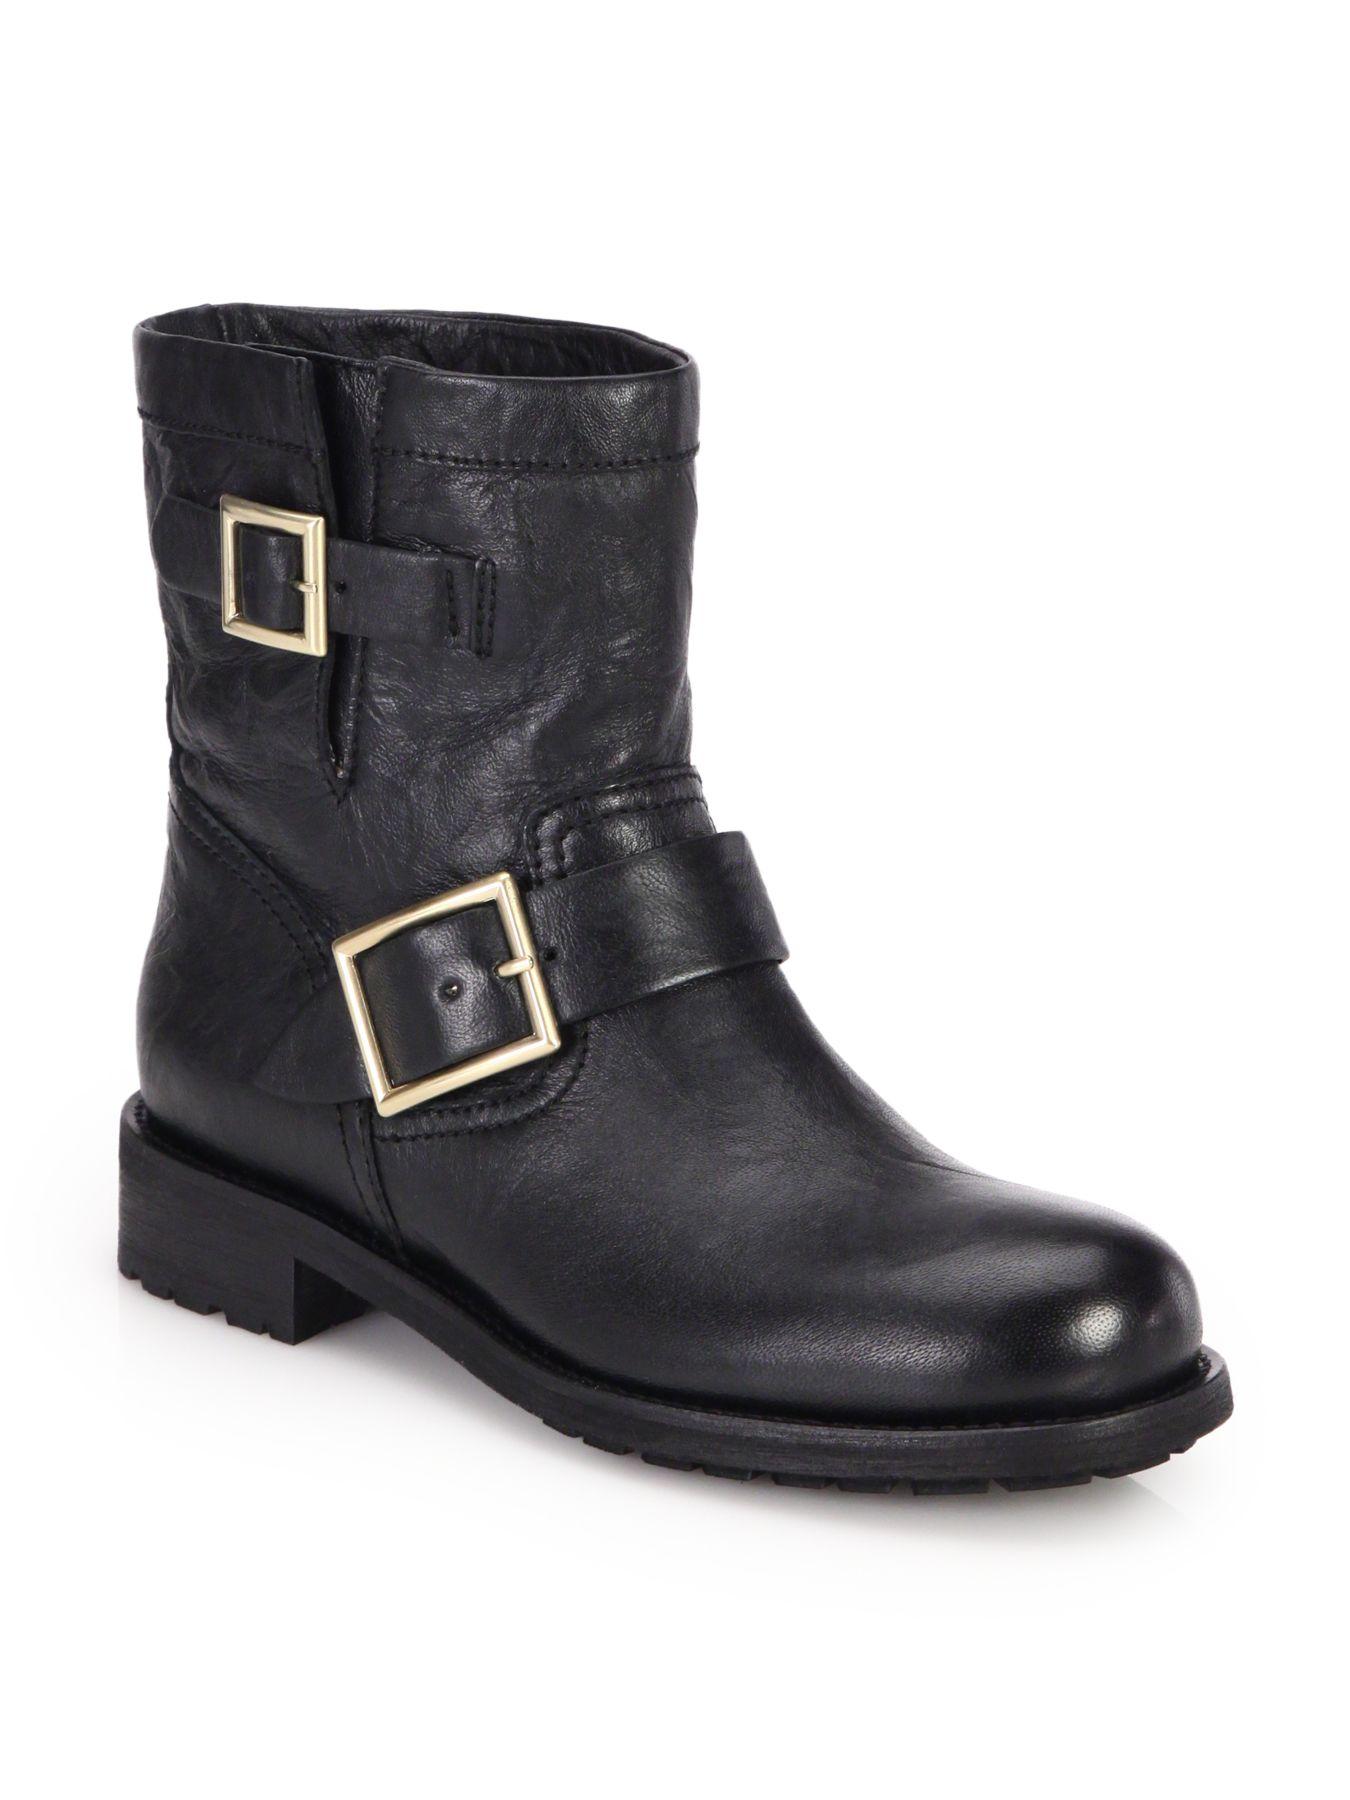 Jimmy Choo Leather Youth Buckled Biker Boot in Black - Save 57% - Lyst